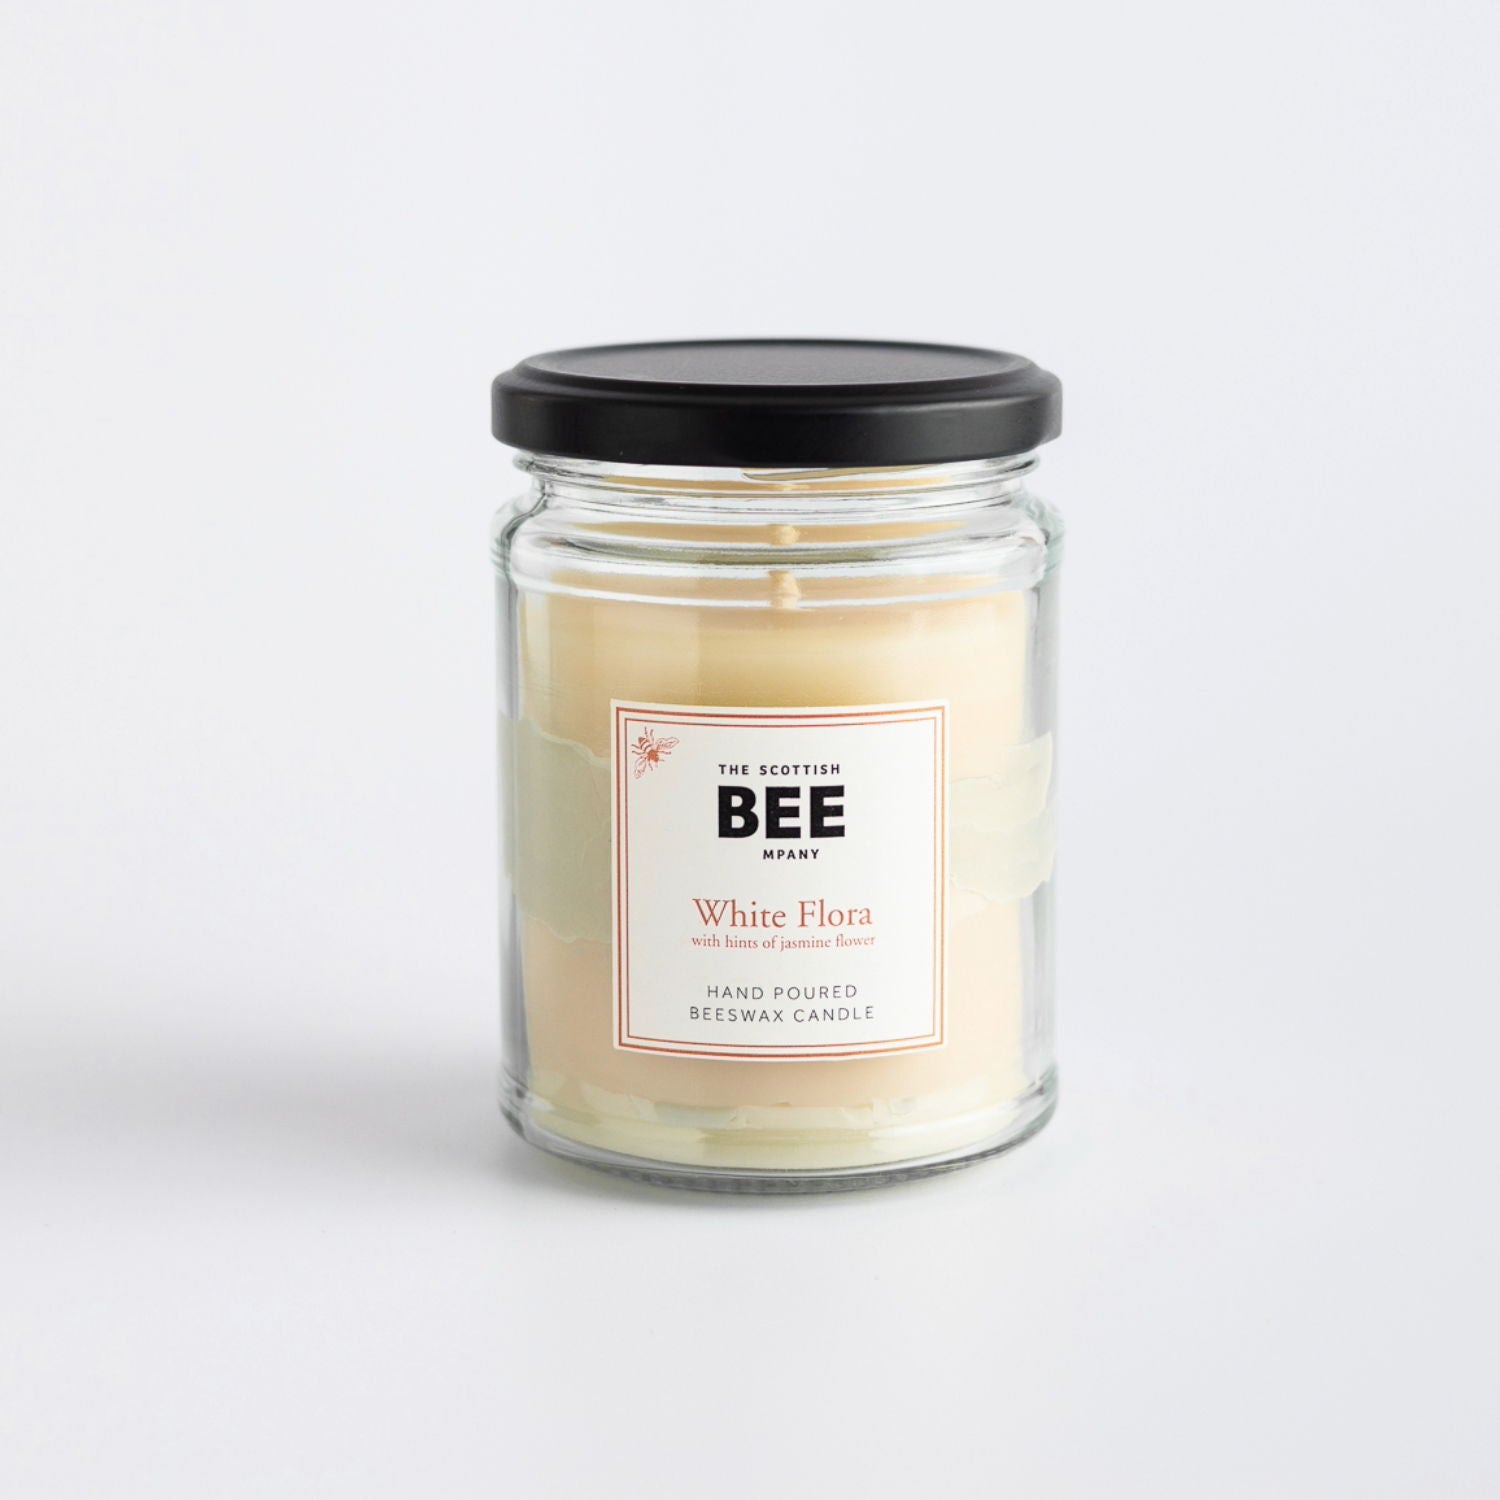 White Flora with hints of jasmine flower scented beeswax candle